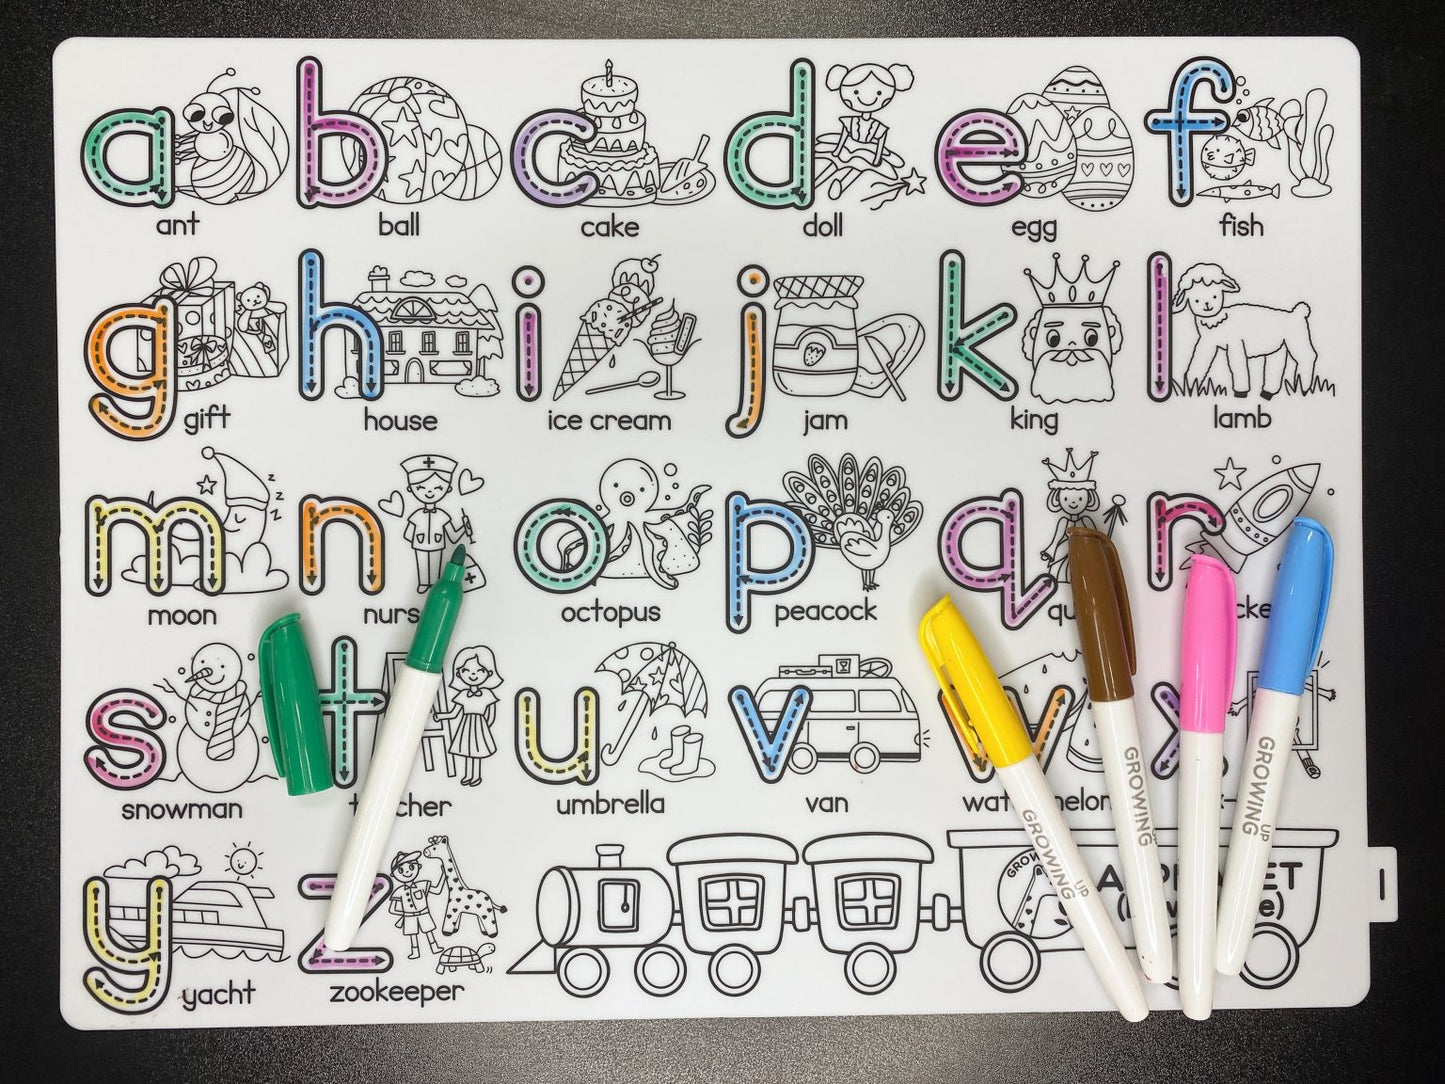 Alphabets (Small Caps) Markers